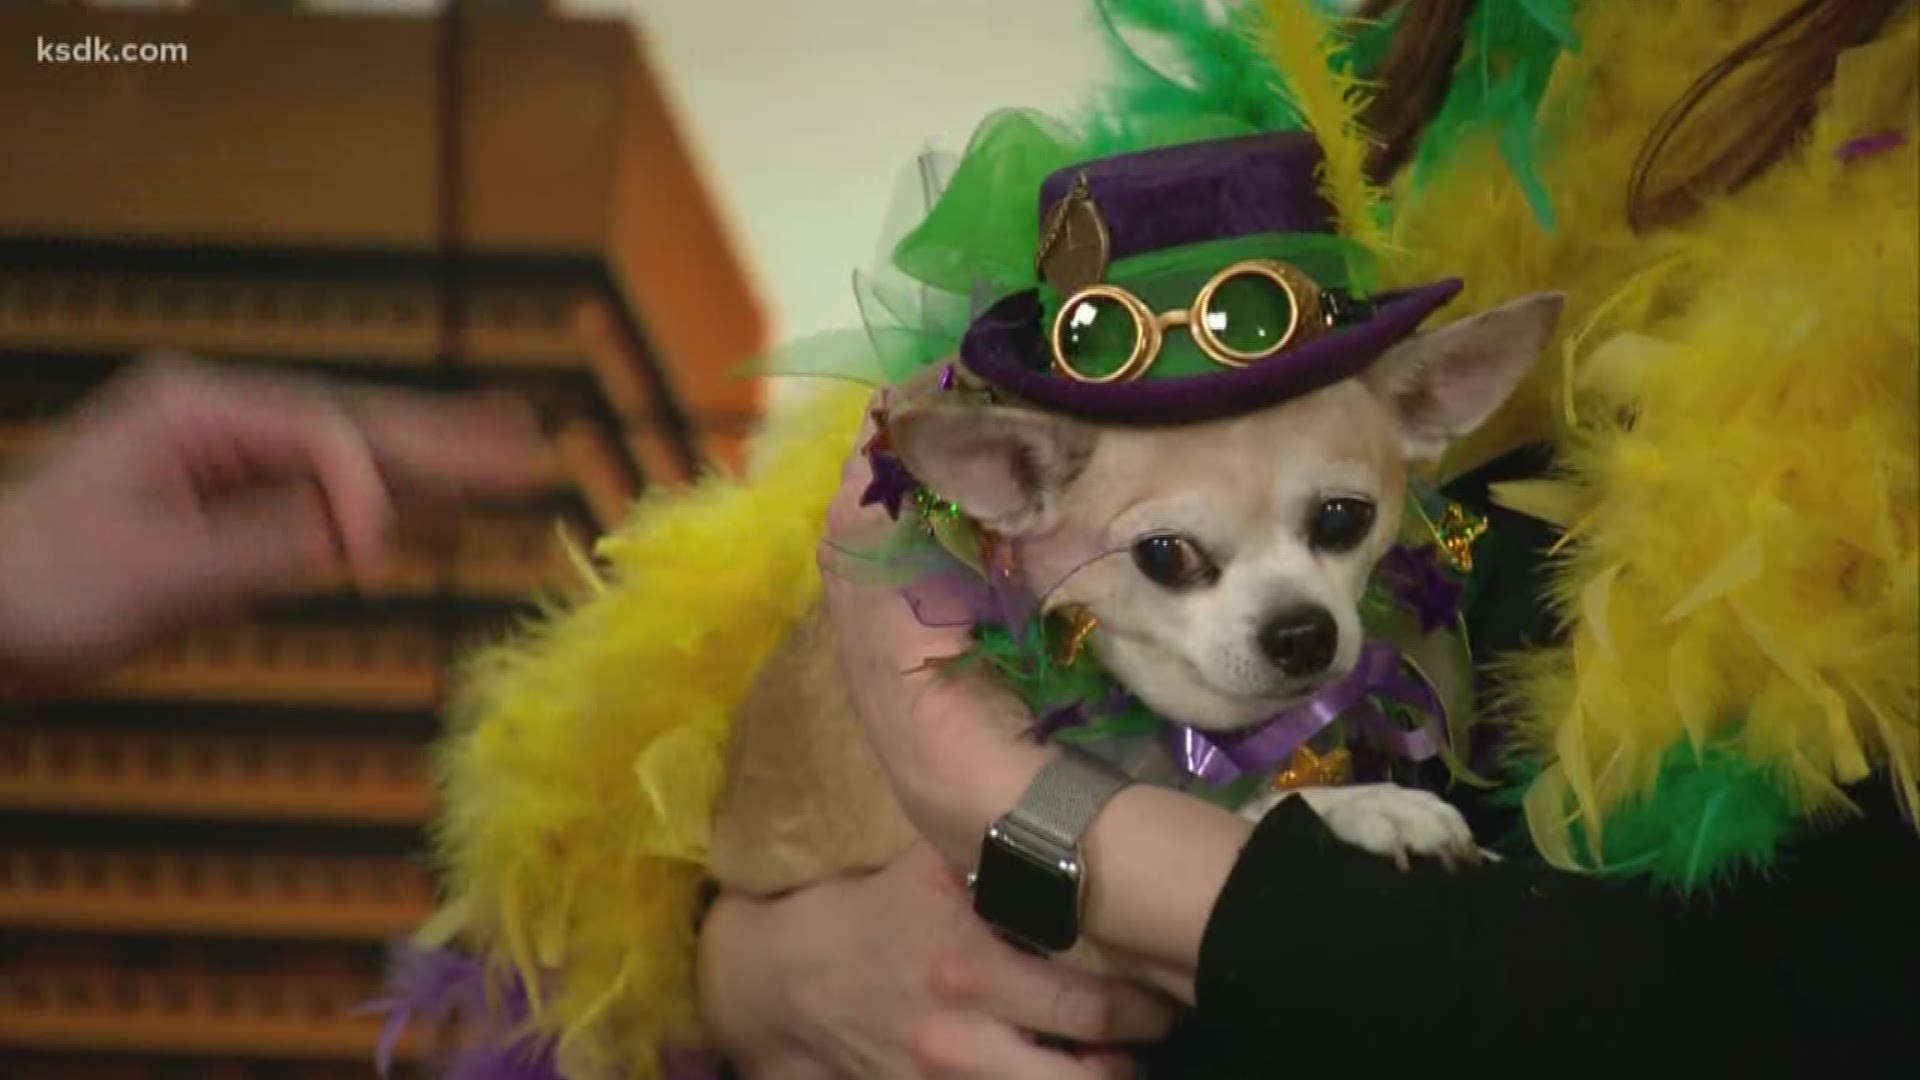 Dogs in costumes, treat samples, and more!